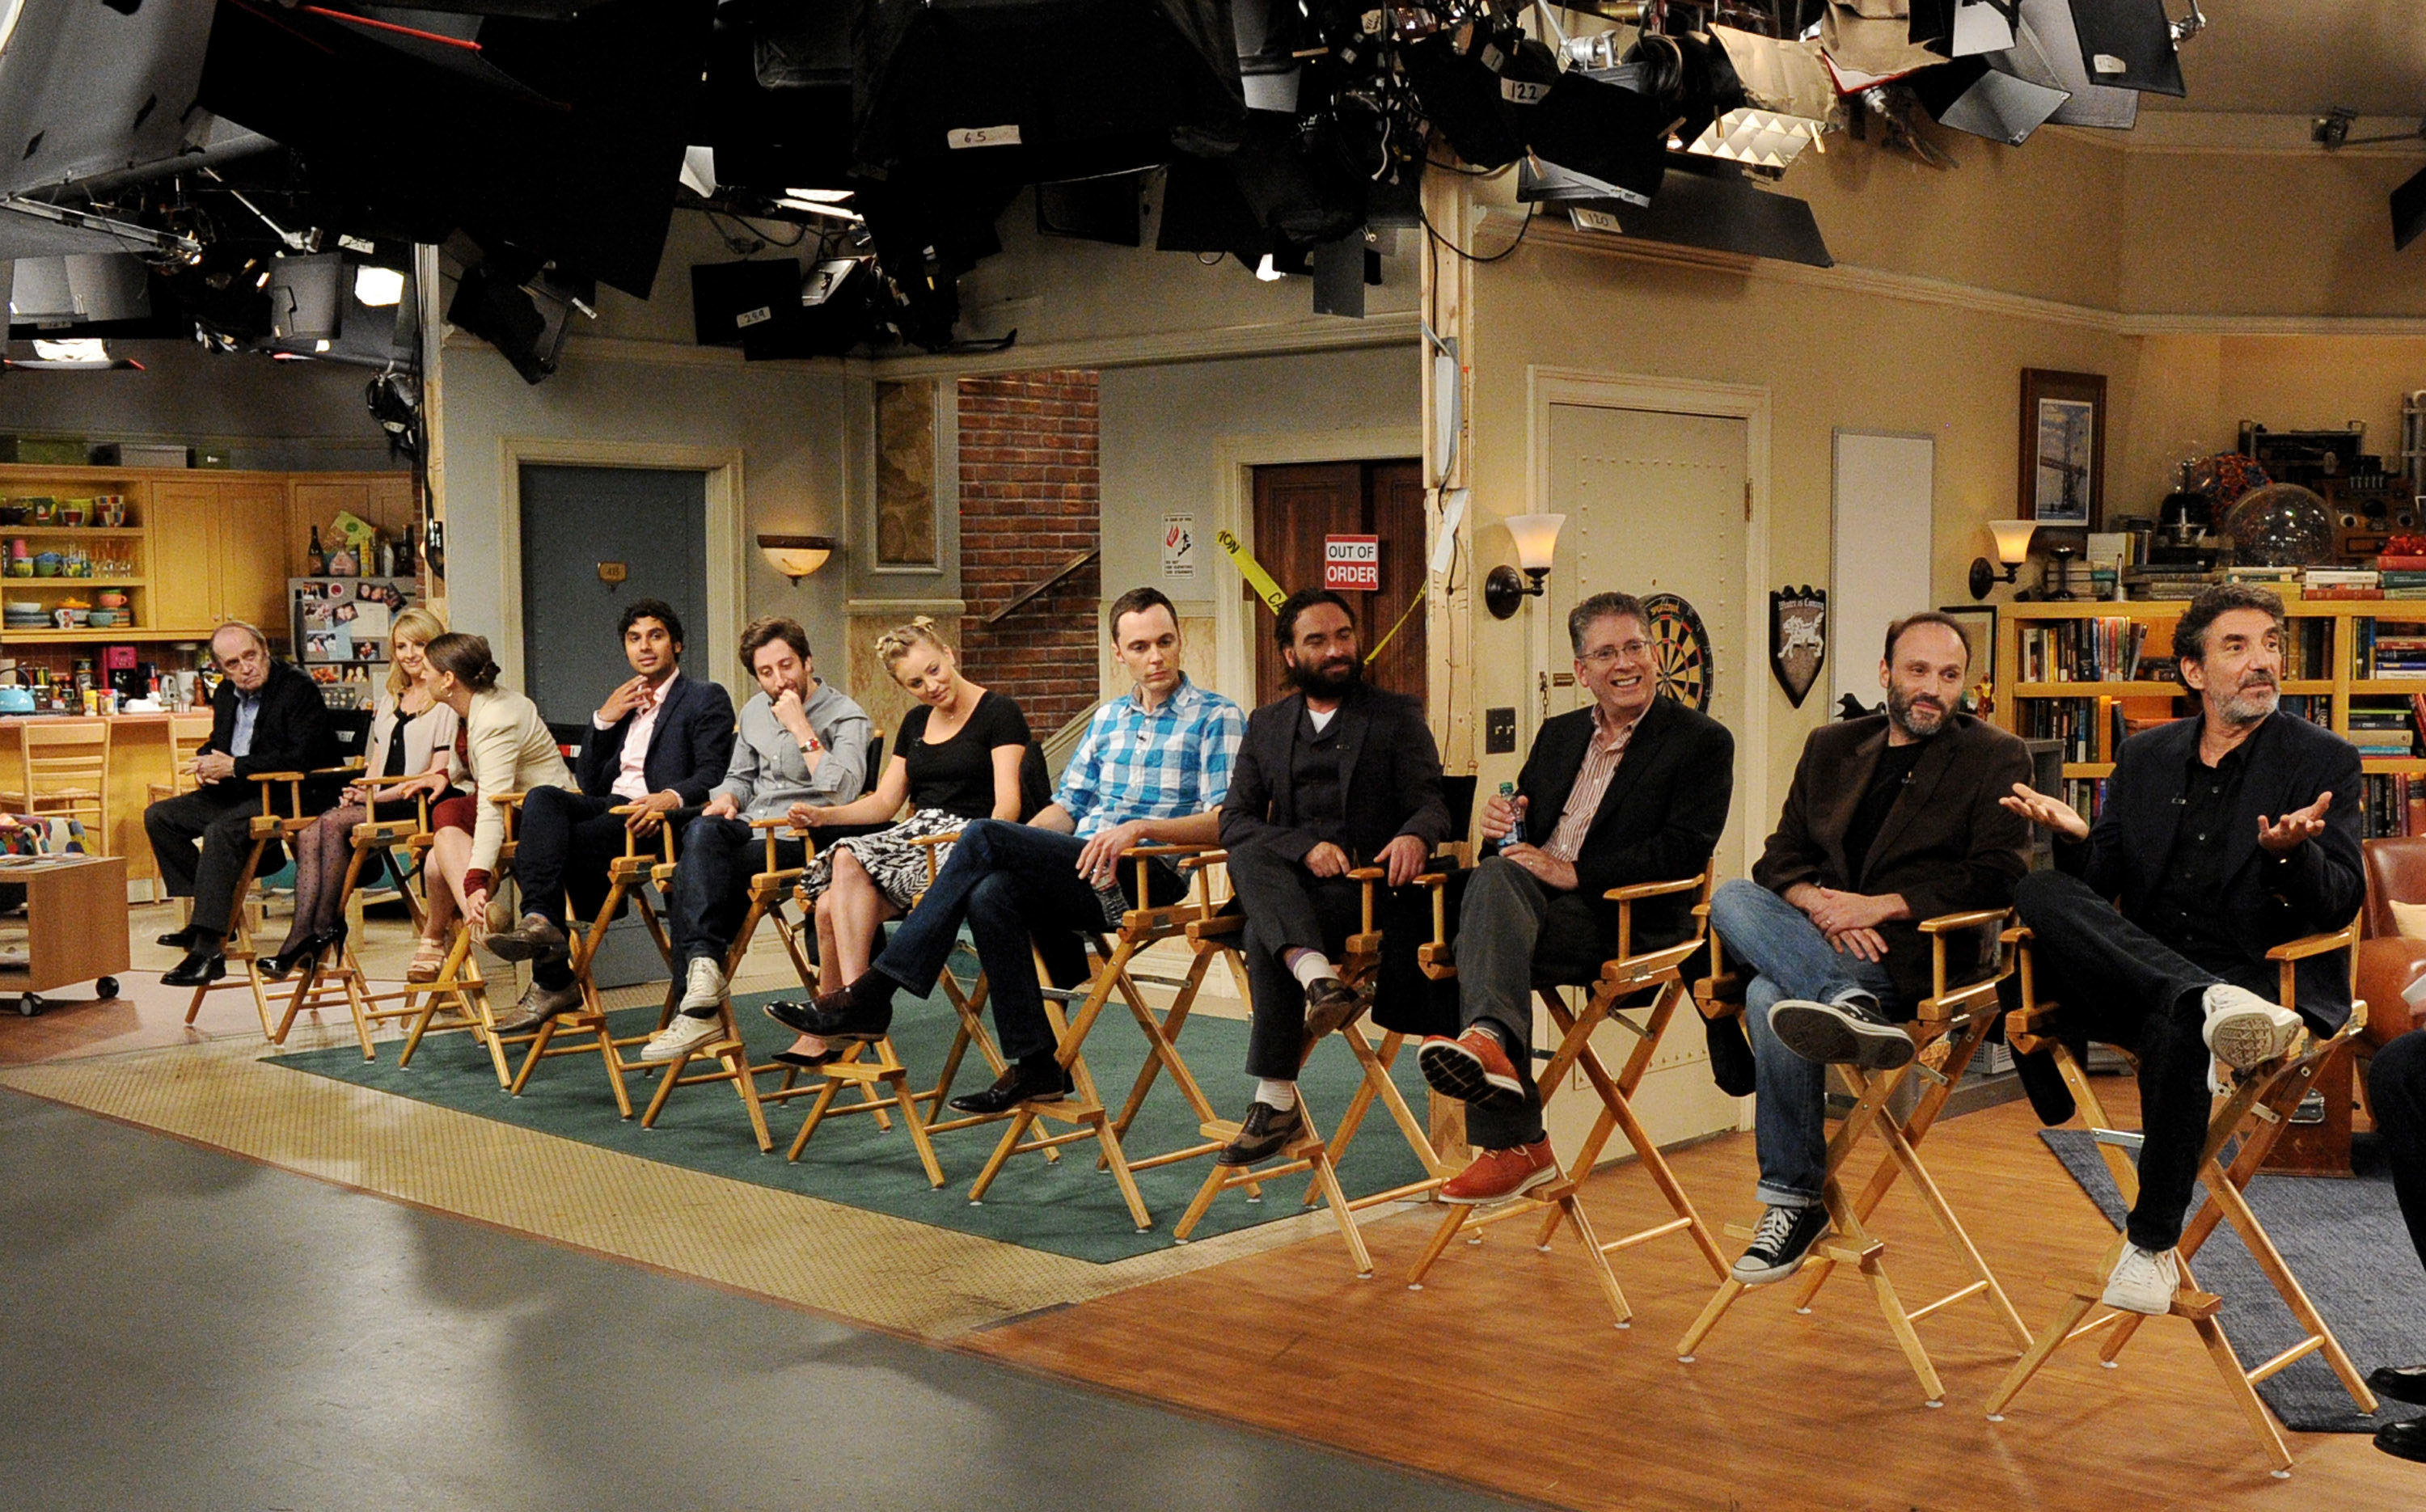 The entire cast sitting on set for a panel discussion